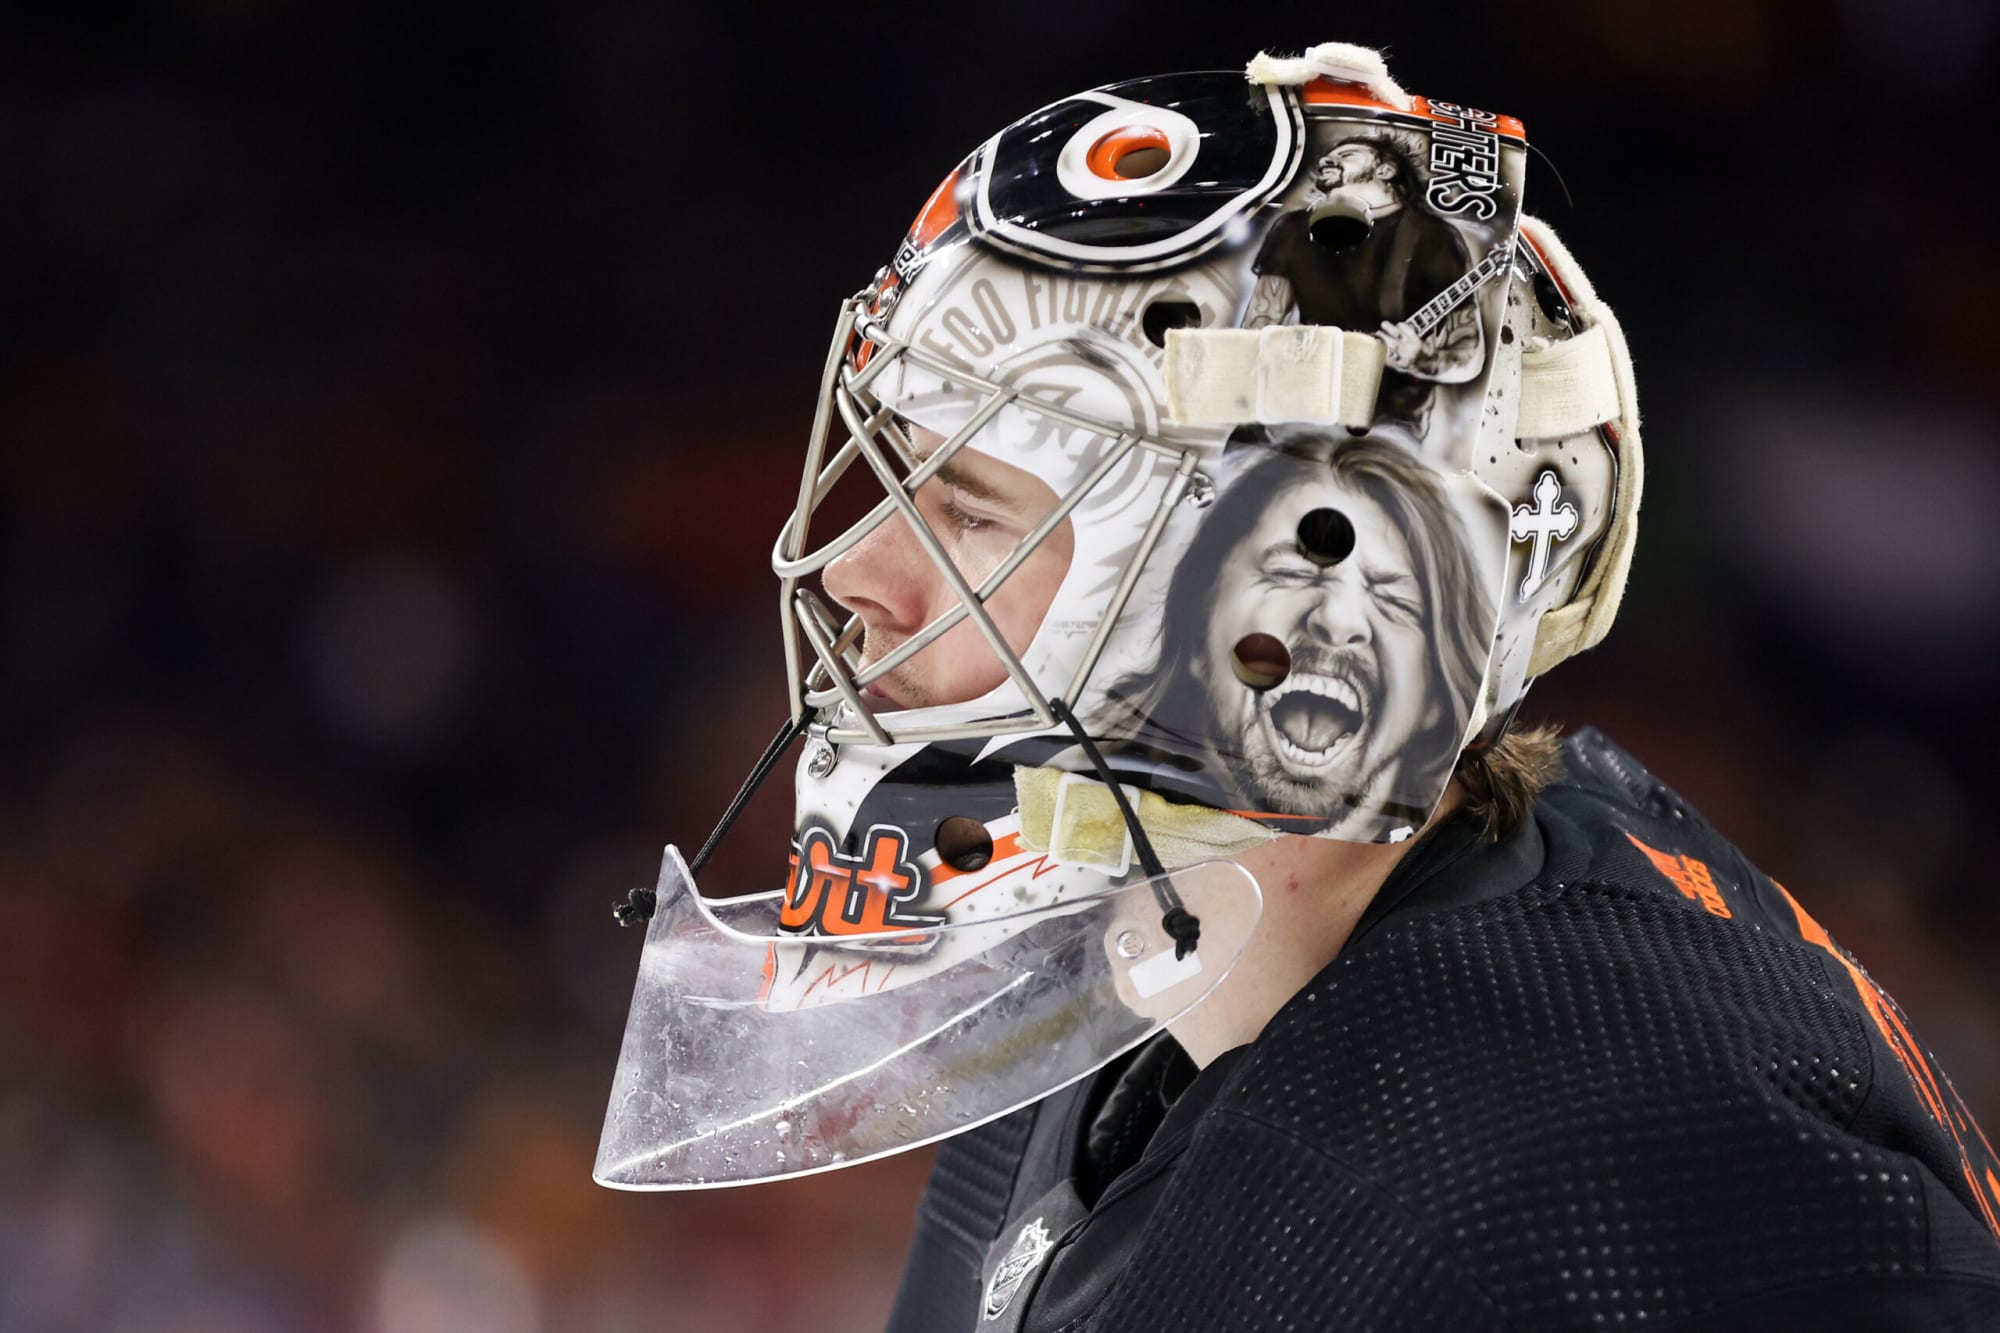 Flyers' Carter Hart vows he will “Be ready” to play in the home